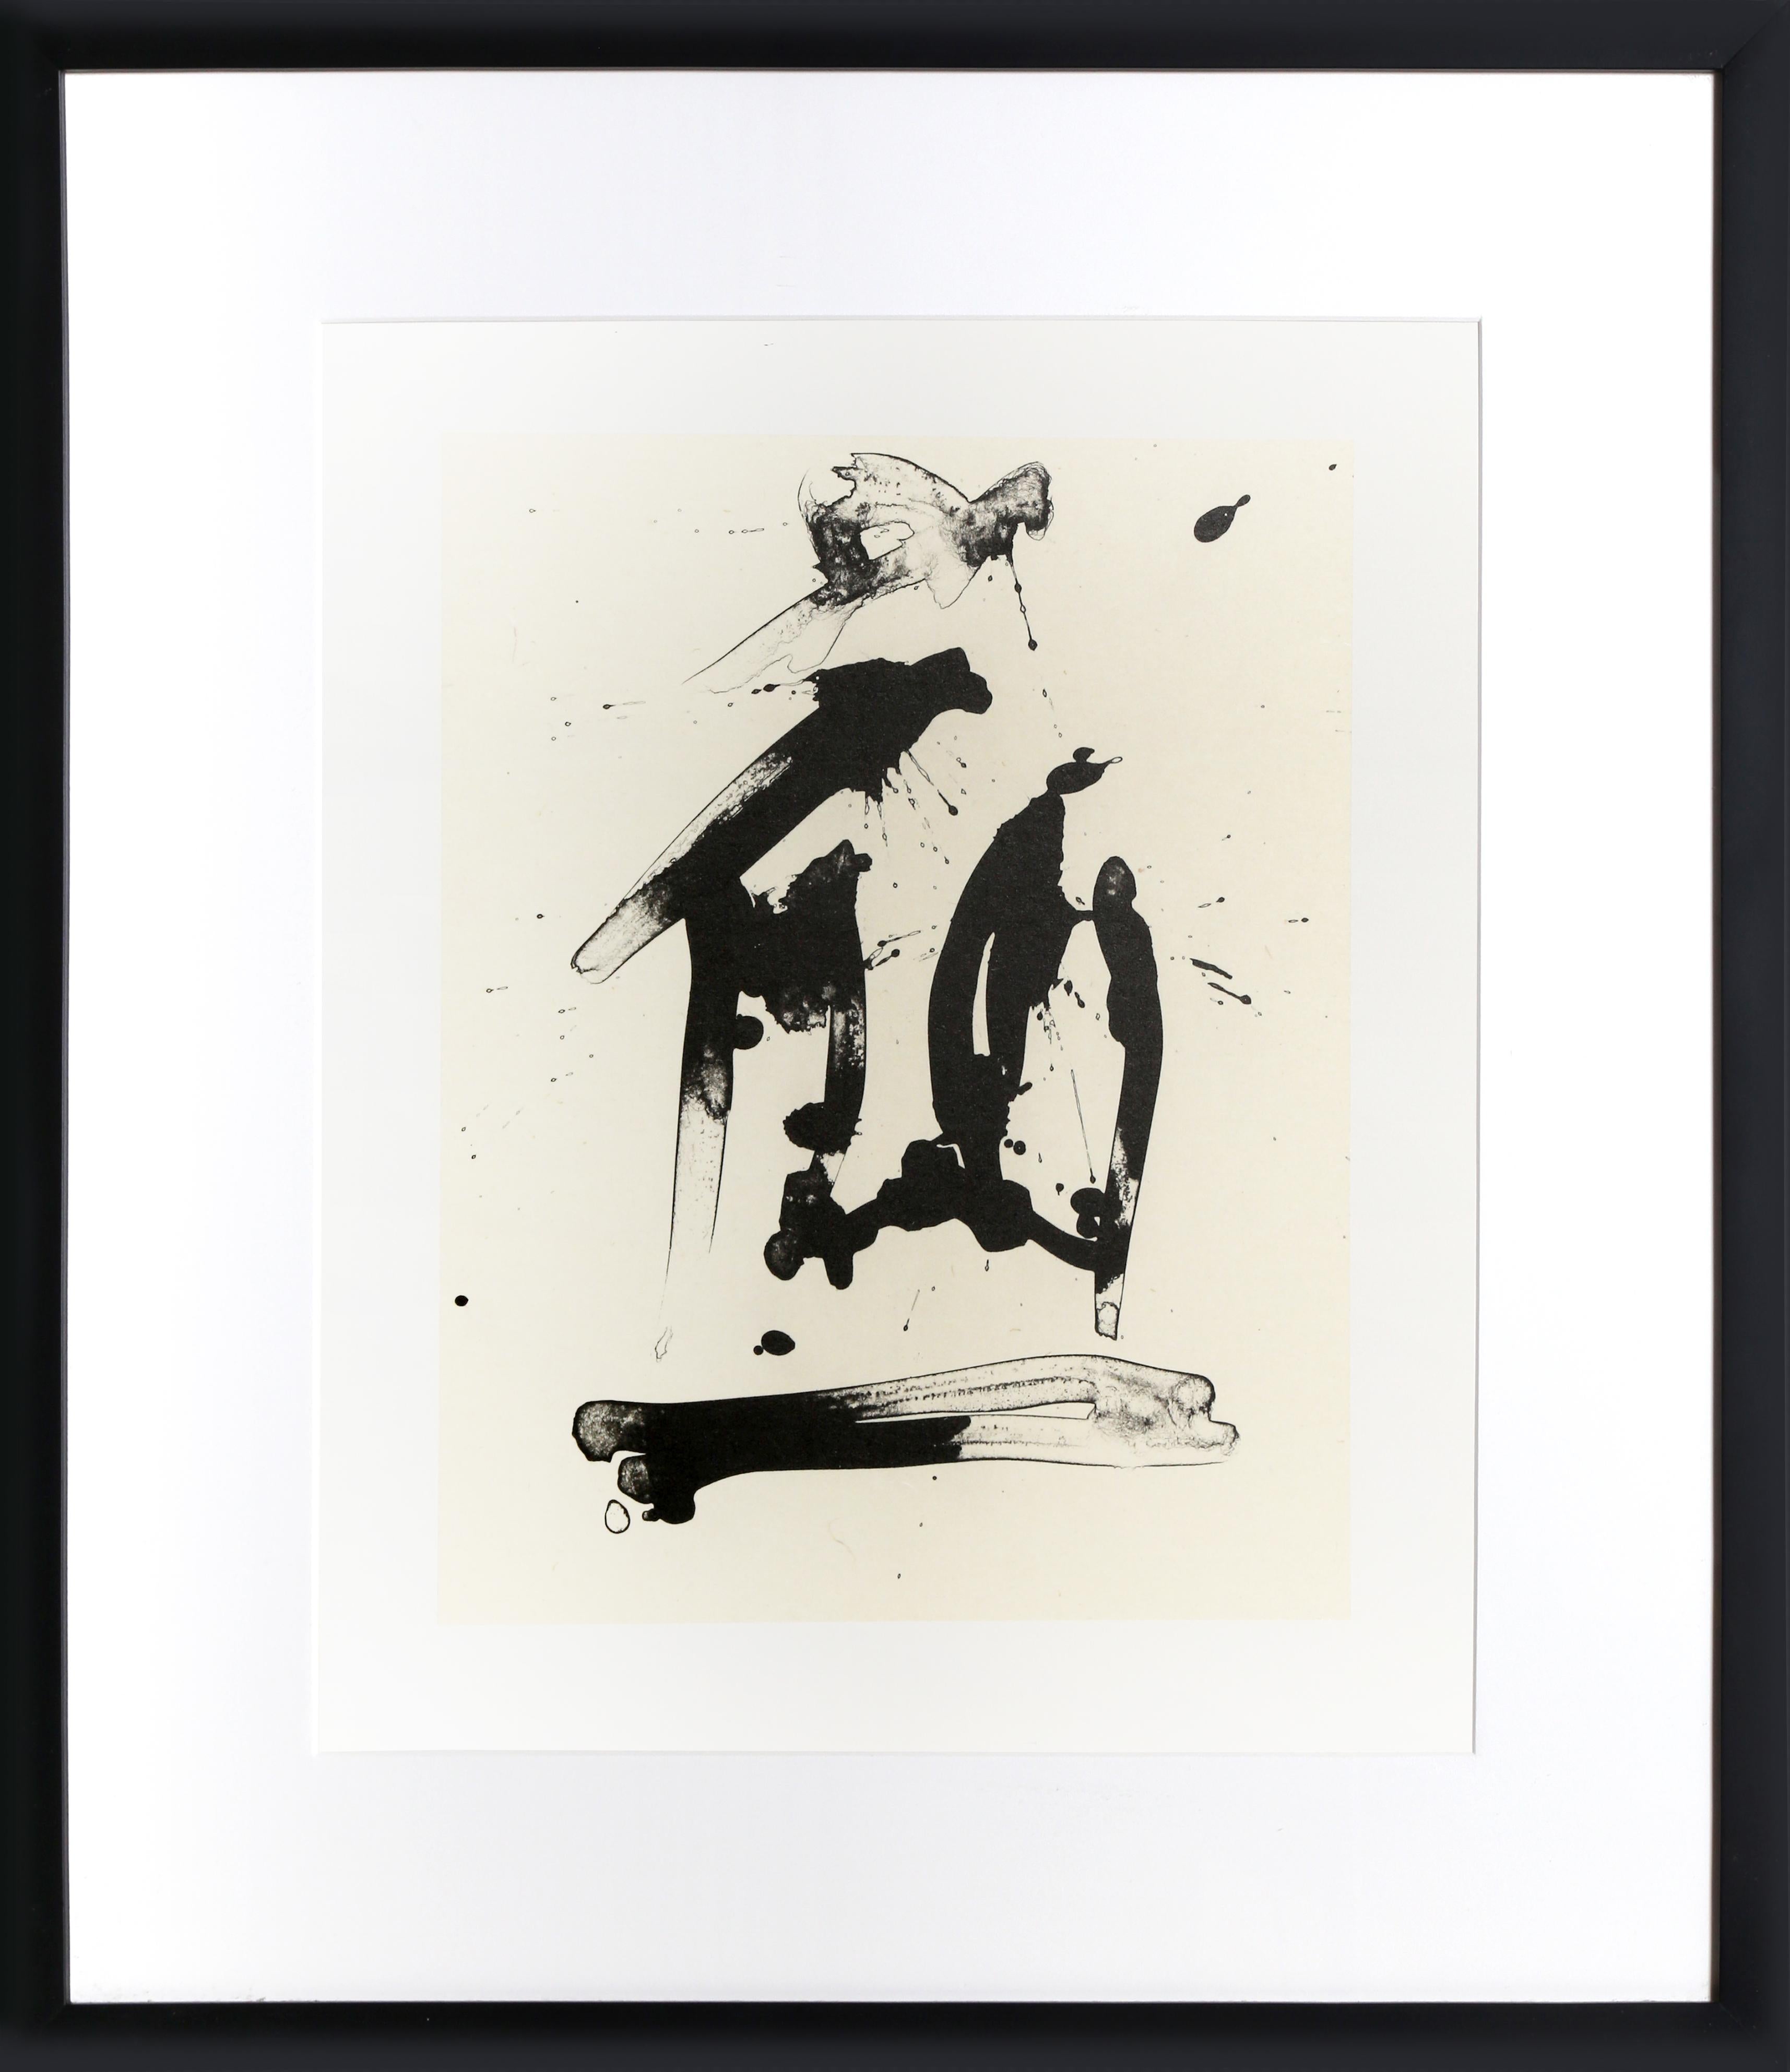 Artist: Robert Motherwell, American (1915 - 1991)
Title: No. 17 from Three Poems, collaboration with Octavio Paz
Year: 1987
Medium:	Lithograph on Japon with Chine Colle
Edition: 750
Image Size: 14 x 10.5 inches
Paper Size: 21 x 16 inches
Frame Size: